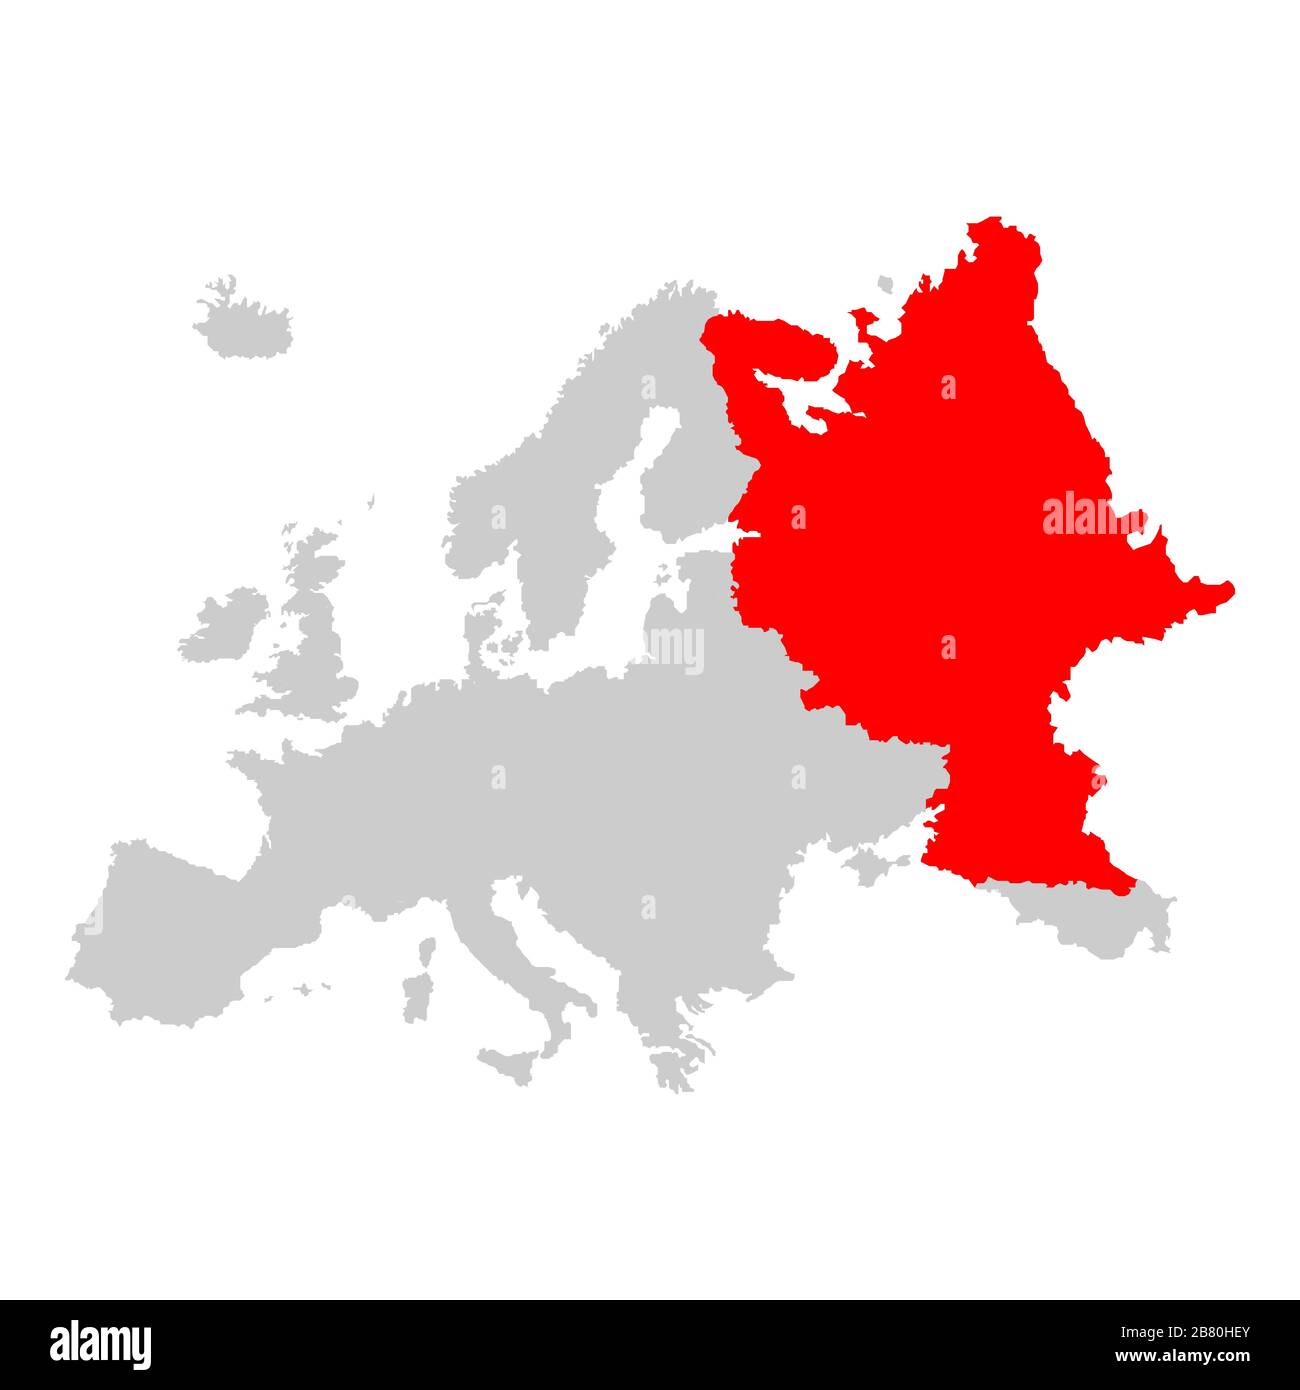 Russia on map of europe Stock Vector